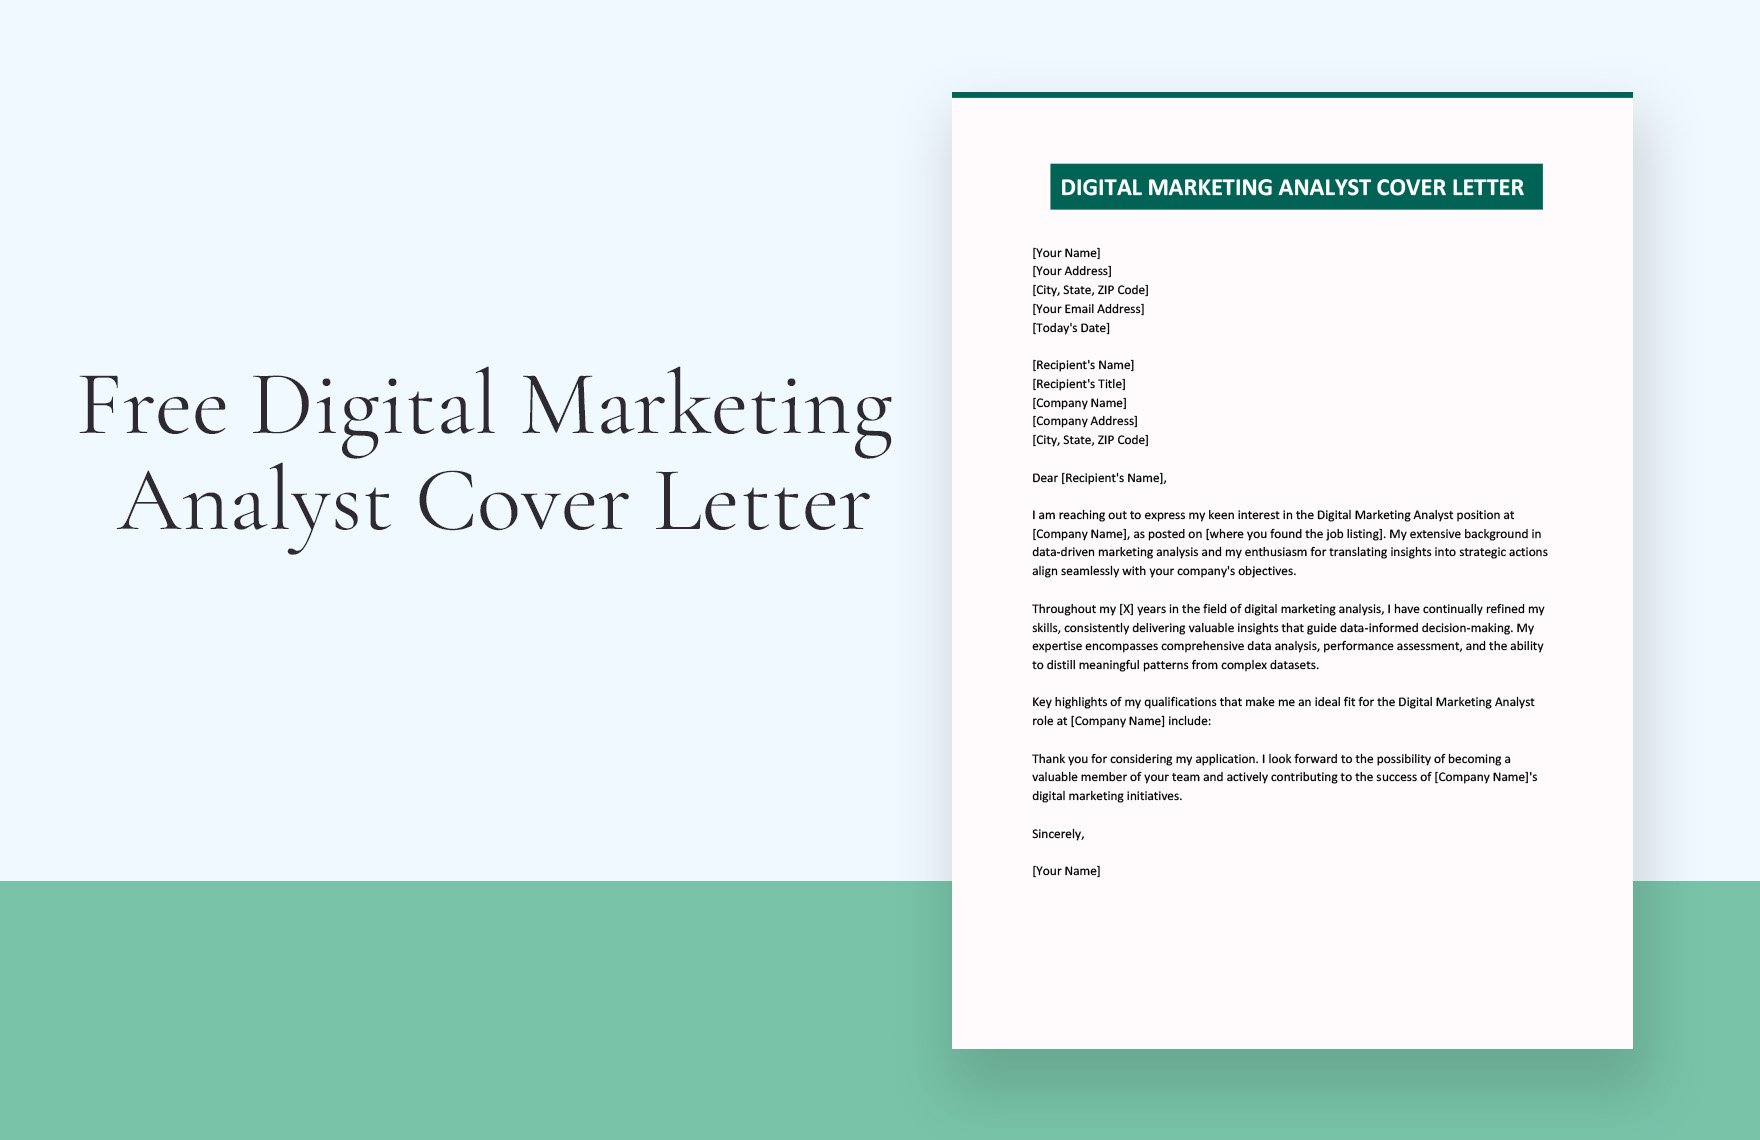 Digital Marketing Analyst Cover Letter in Word, Google Docs